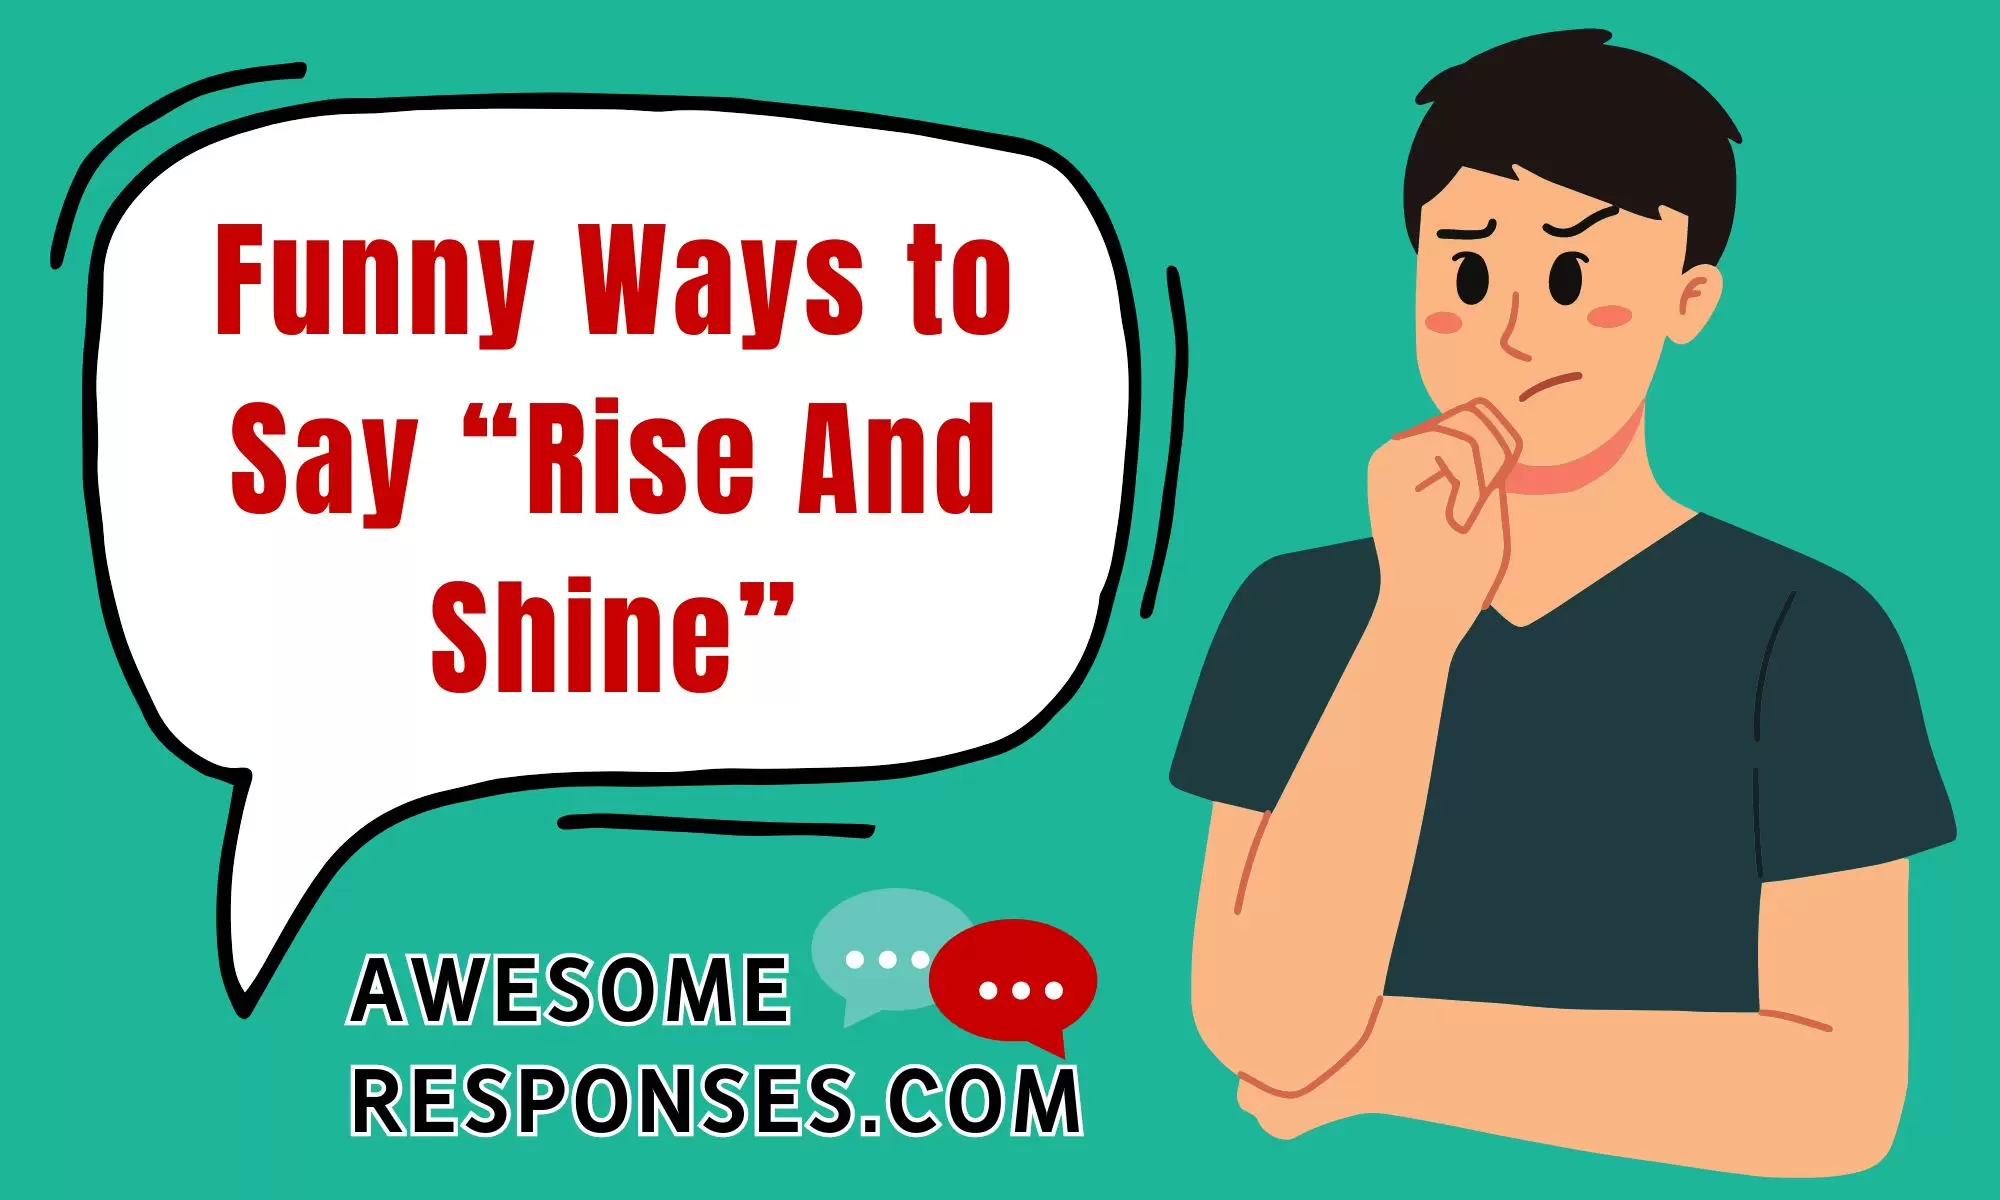 Funny Ways to Say “Rise And Shine”